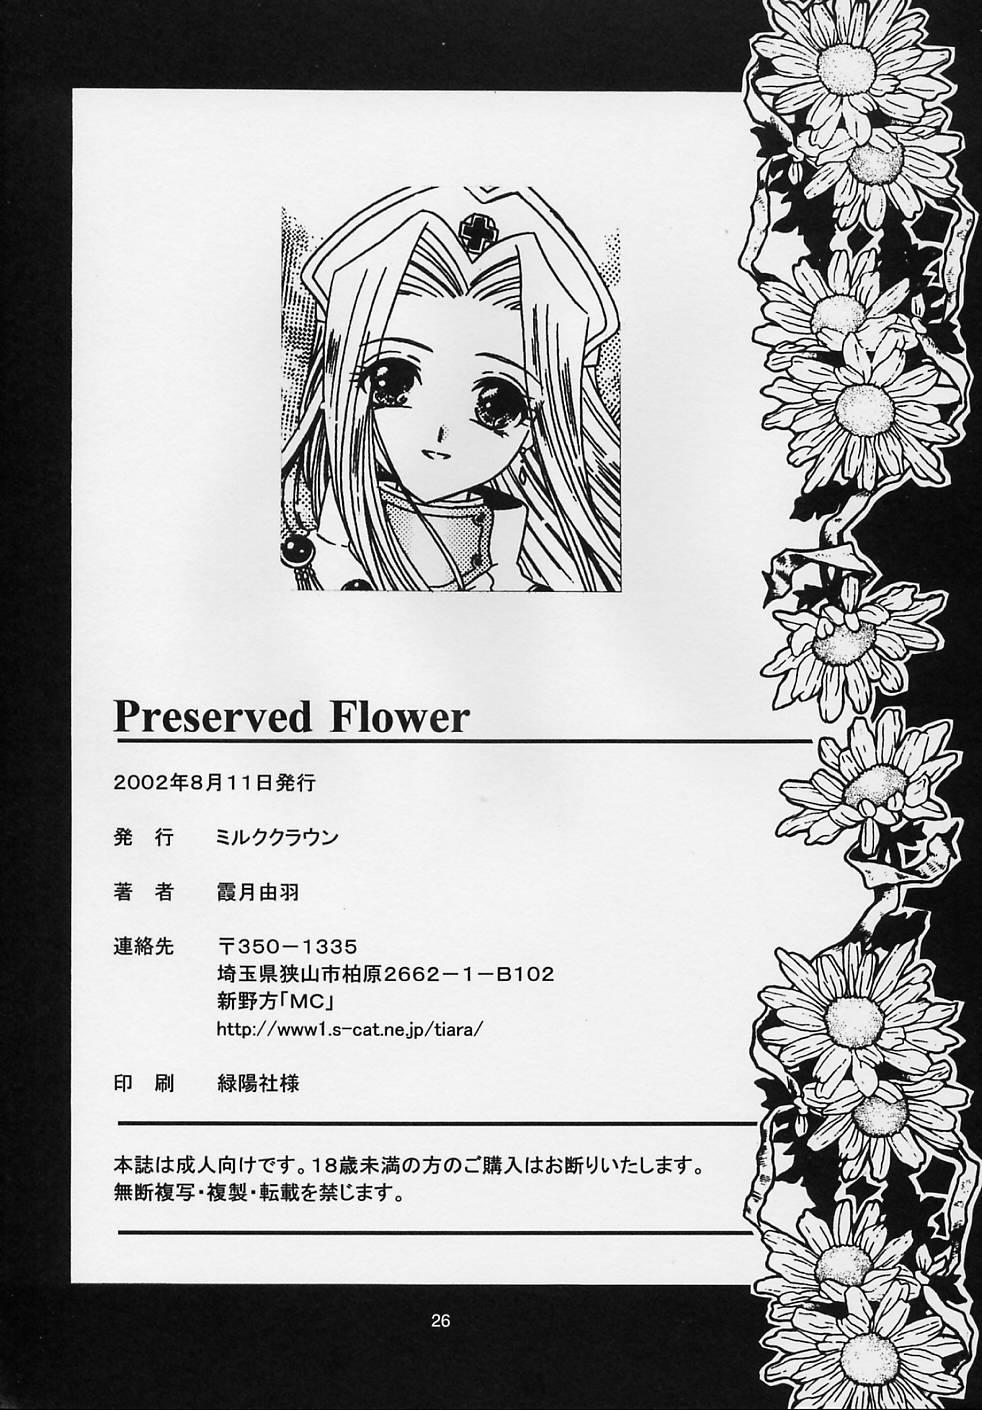 Porno Preserved Flower - Tales of phantasia Chubby - Page 25